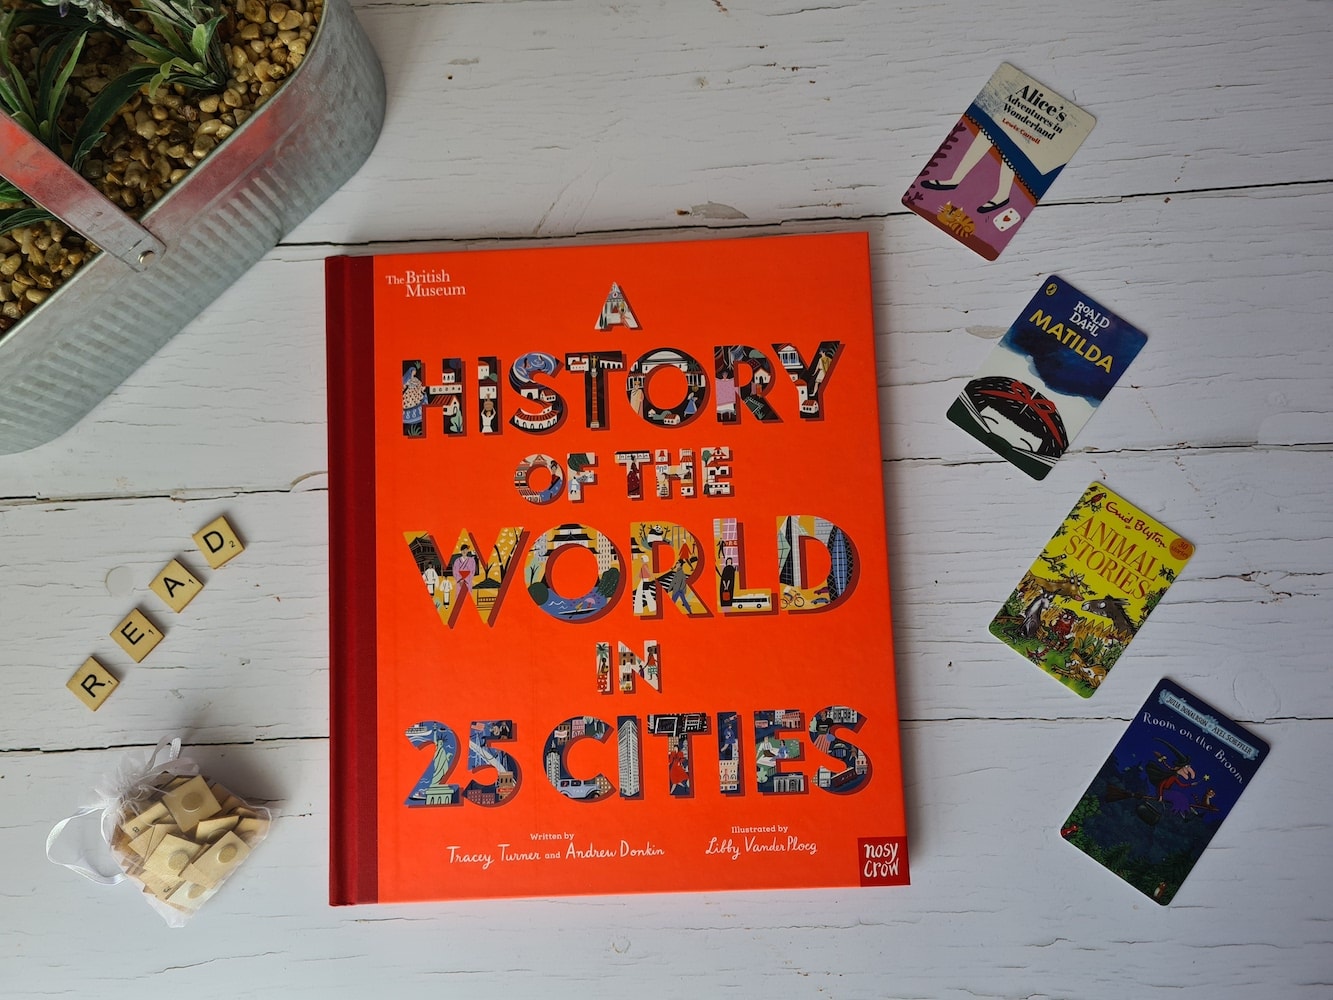 This week's children's book review is all about A History of the World in 25 Cities by Tracey Turner and Andrew Donkin.